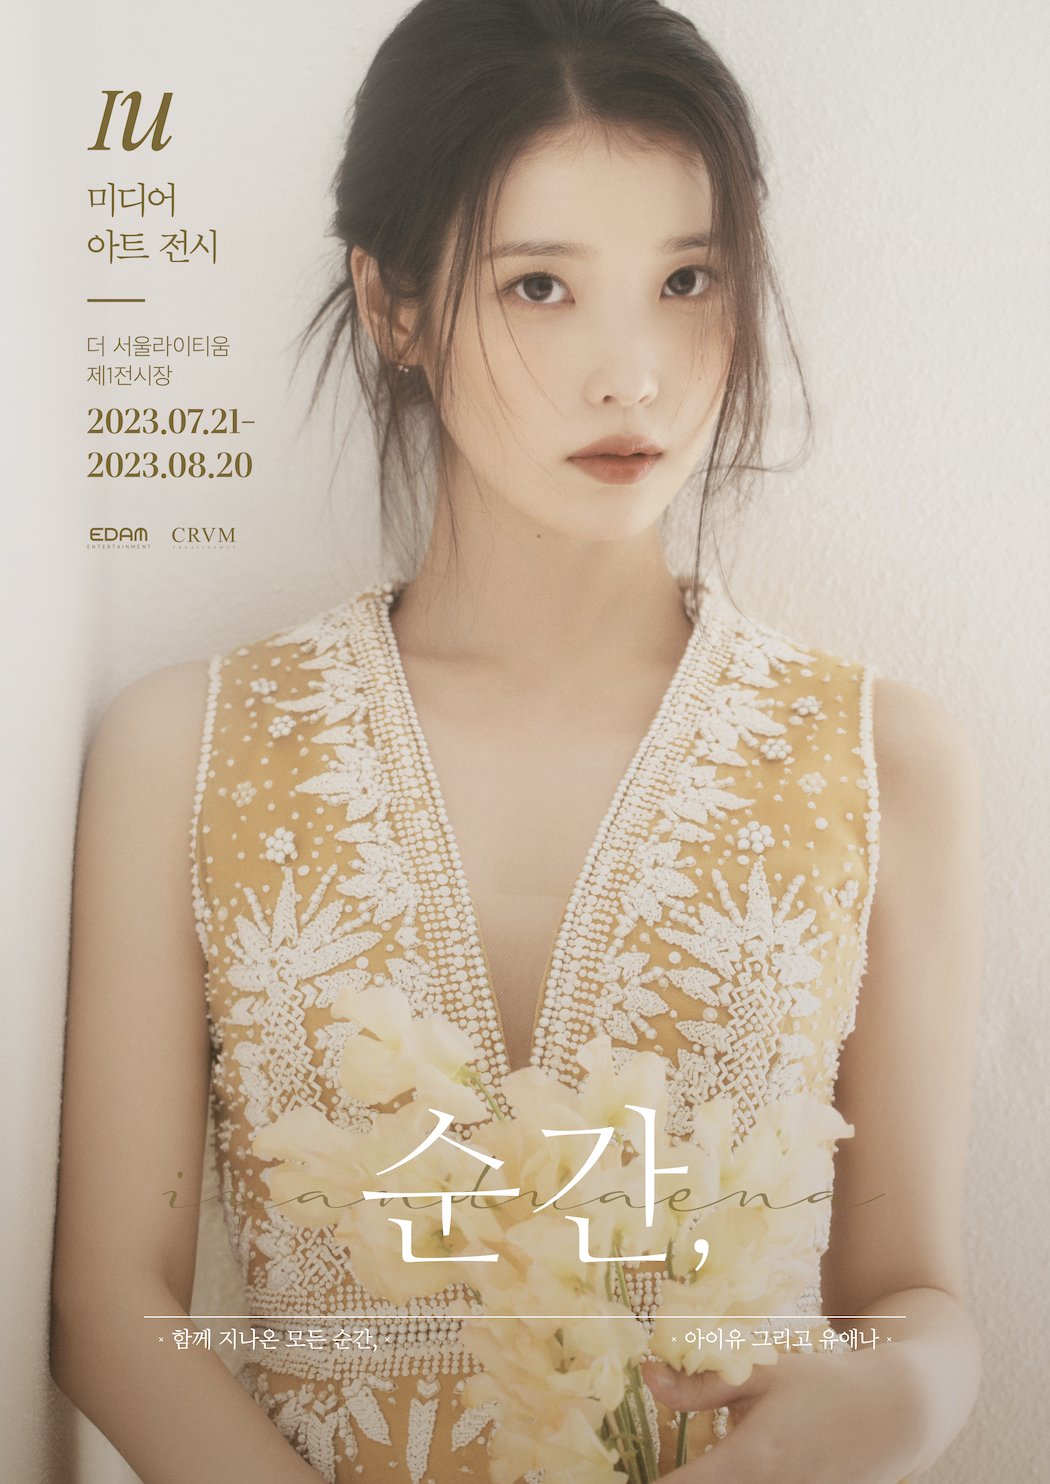 IU holds a fan concert to commemorate the 15th anniversary of their debut... Held on September 23rd and 24th